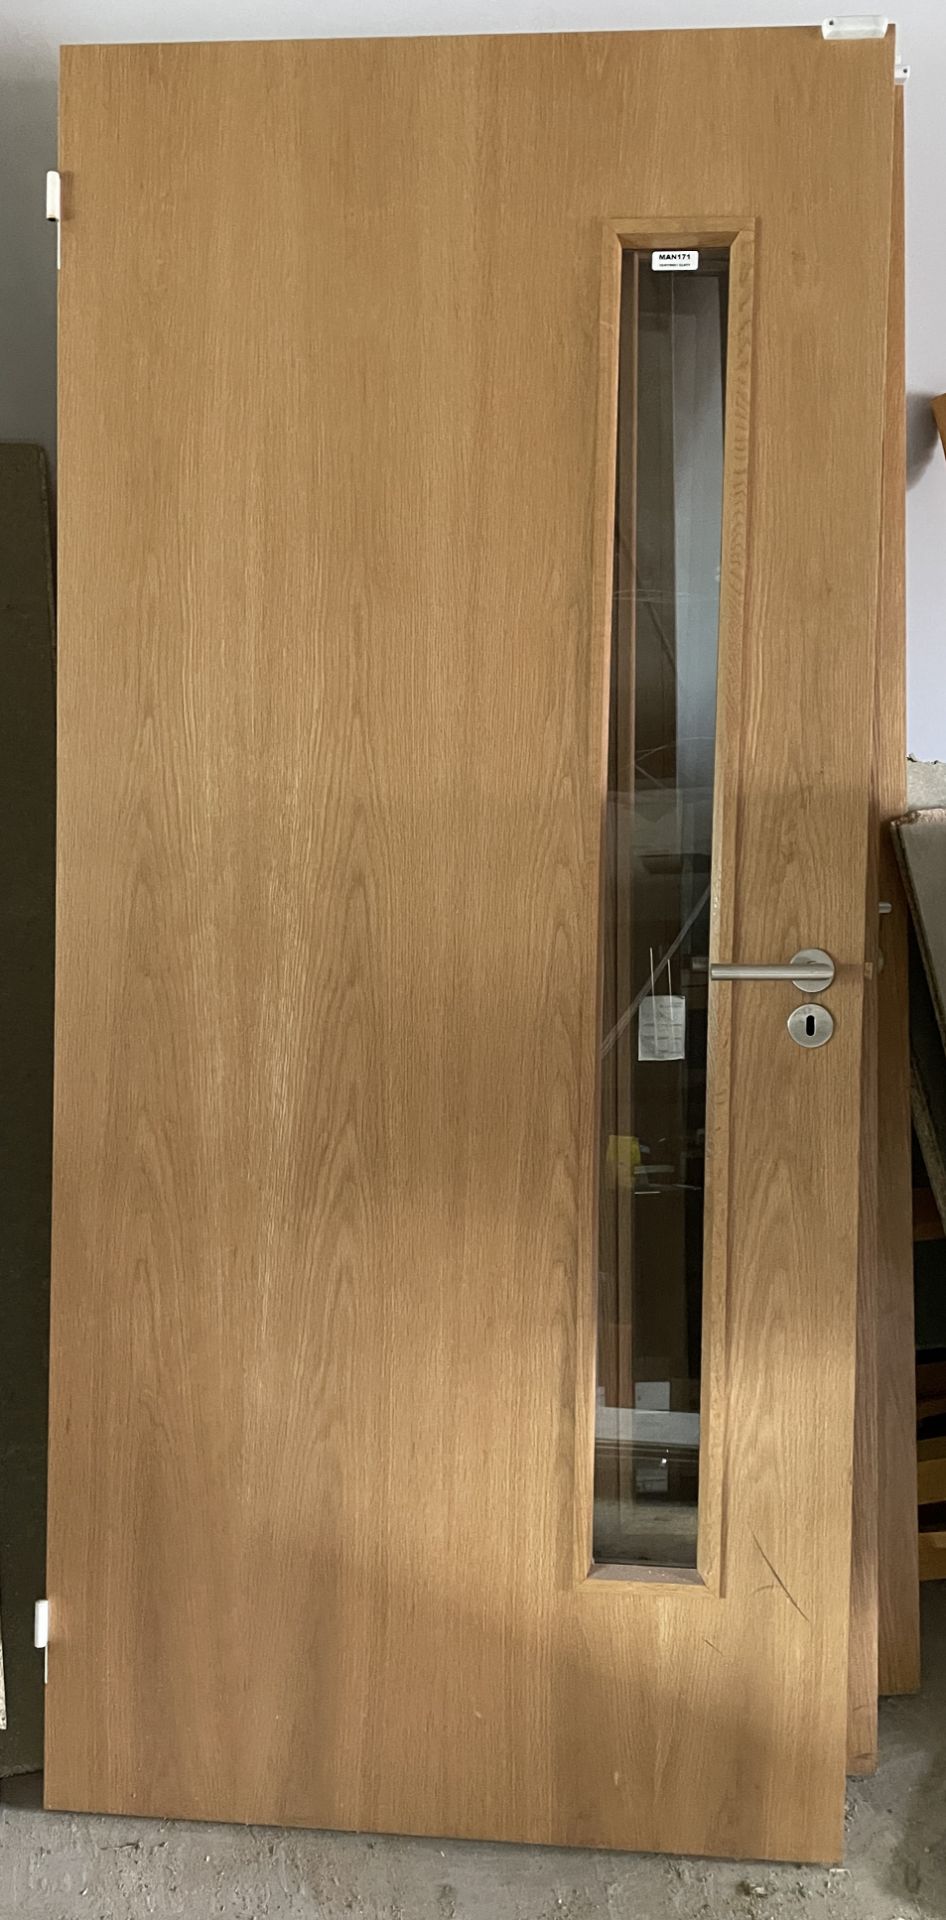 4 x Office Fire Doors With Glass Window And Stainless Steel Lock - Dimensions: H204 x W93 x D4.2cm - Image 5 of 5